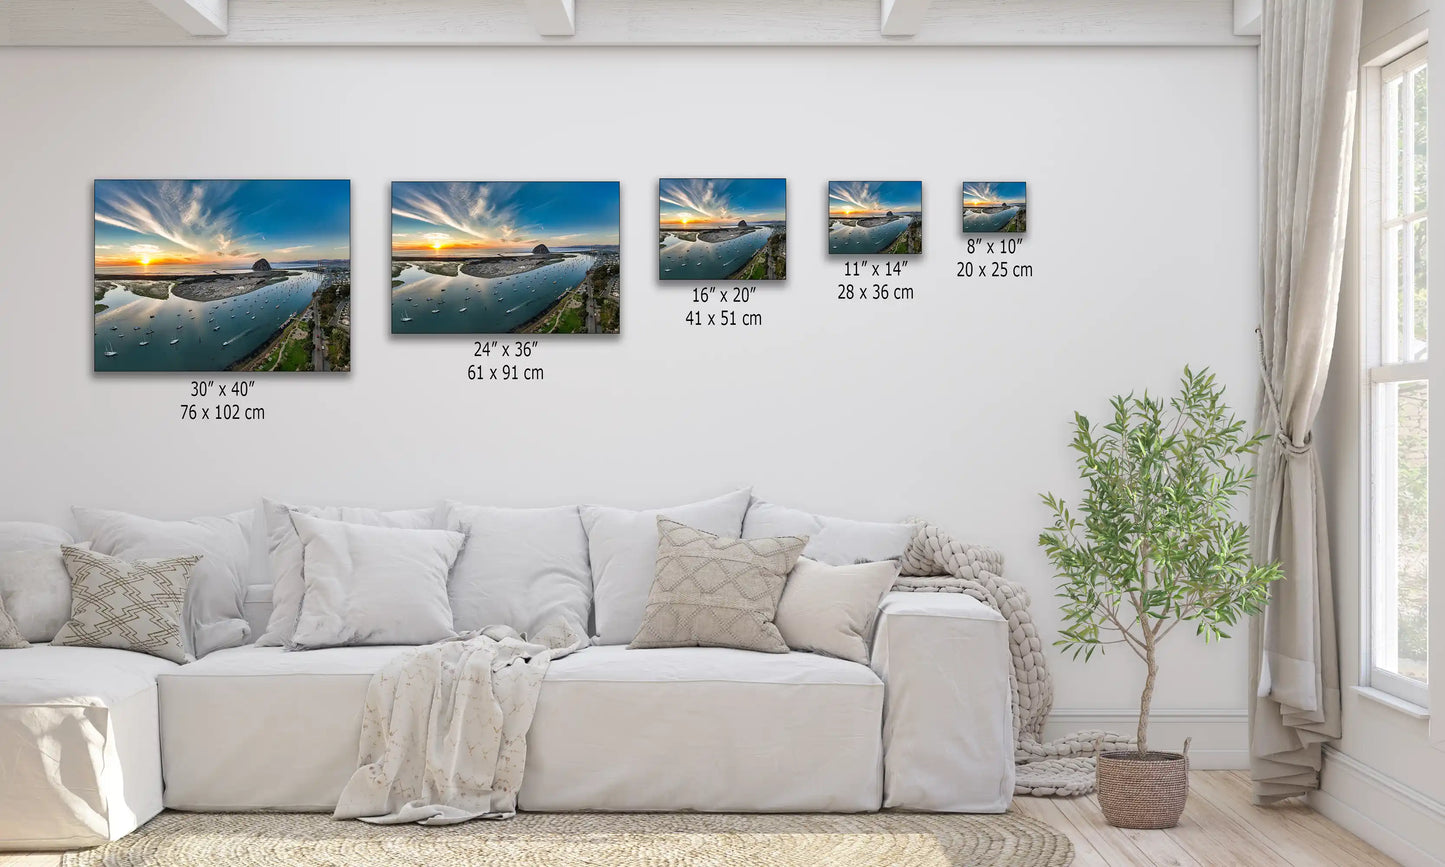 A display of various-sized canvas prints depicting an aerial view of Morro Bay, capturing the essence of the tranquil Pacific coast.